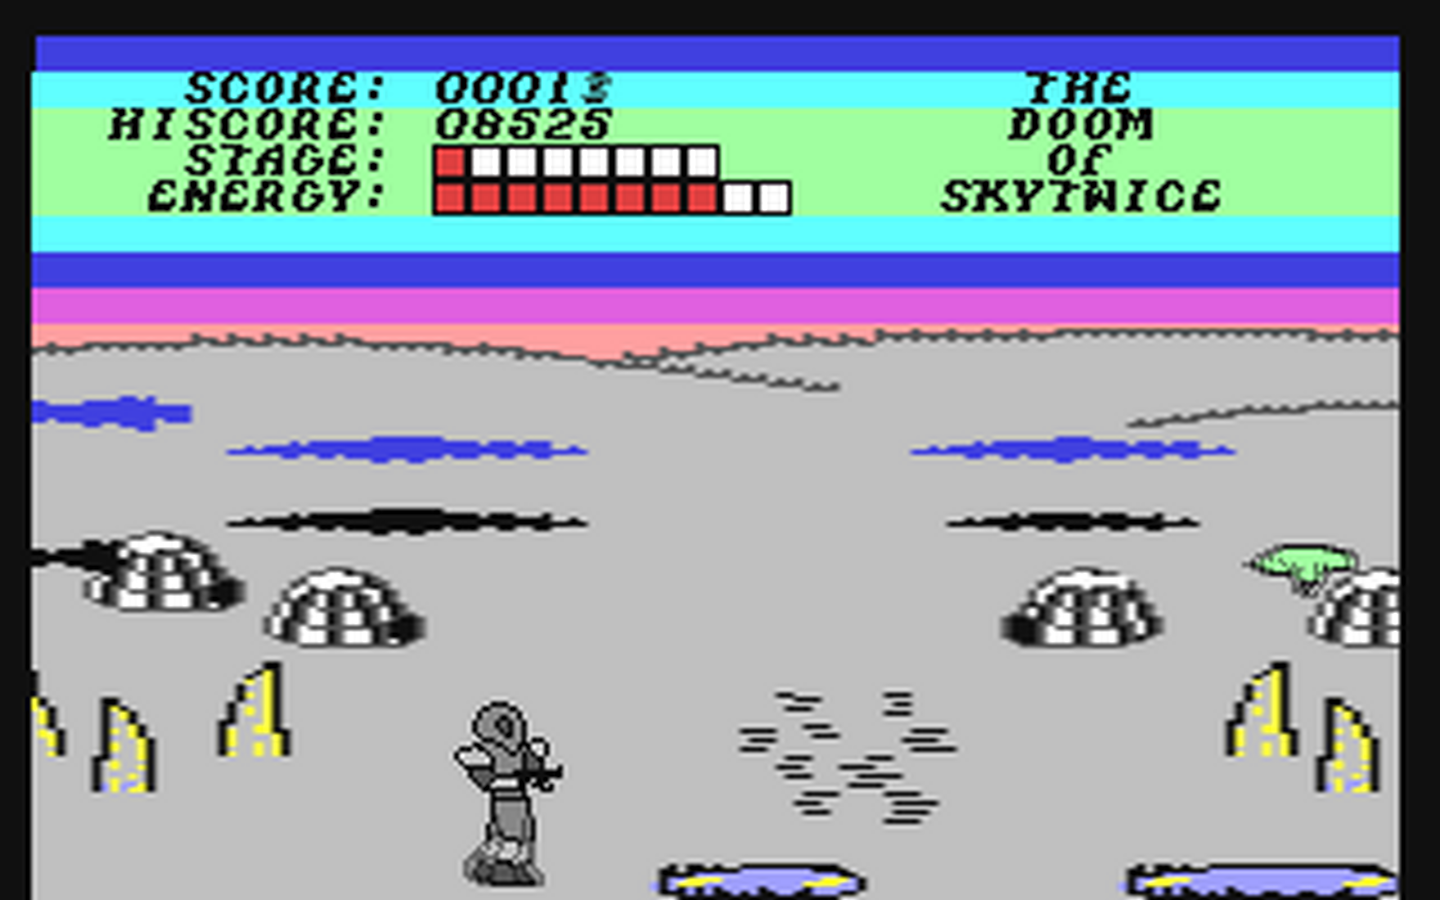 C64 GameBase Sky_Twice Action_Software_[American_Action] 1987